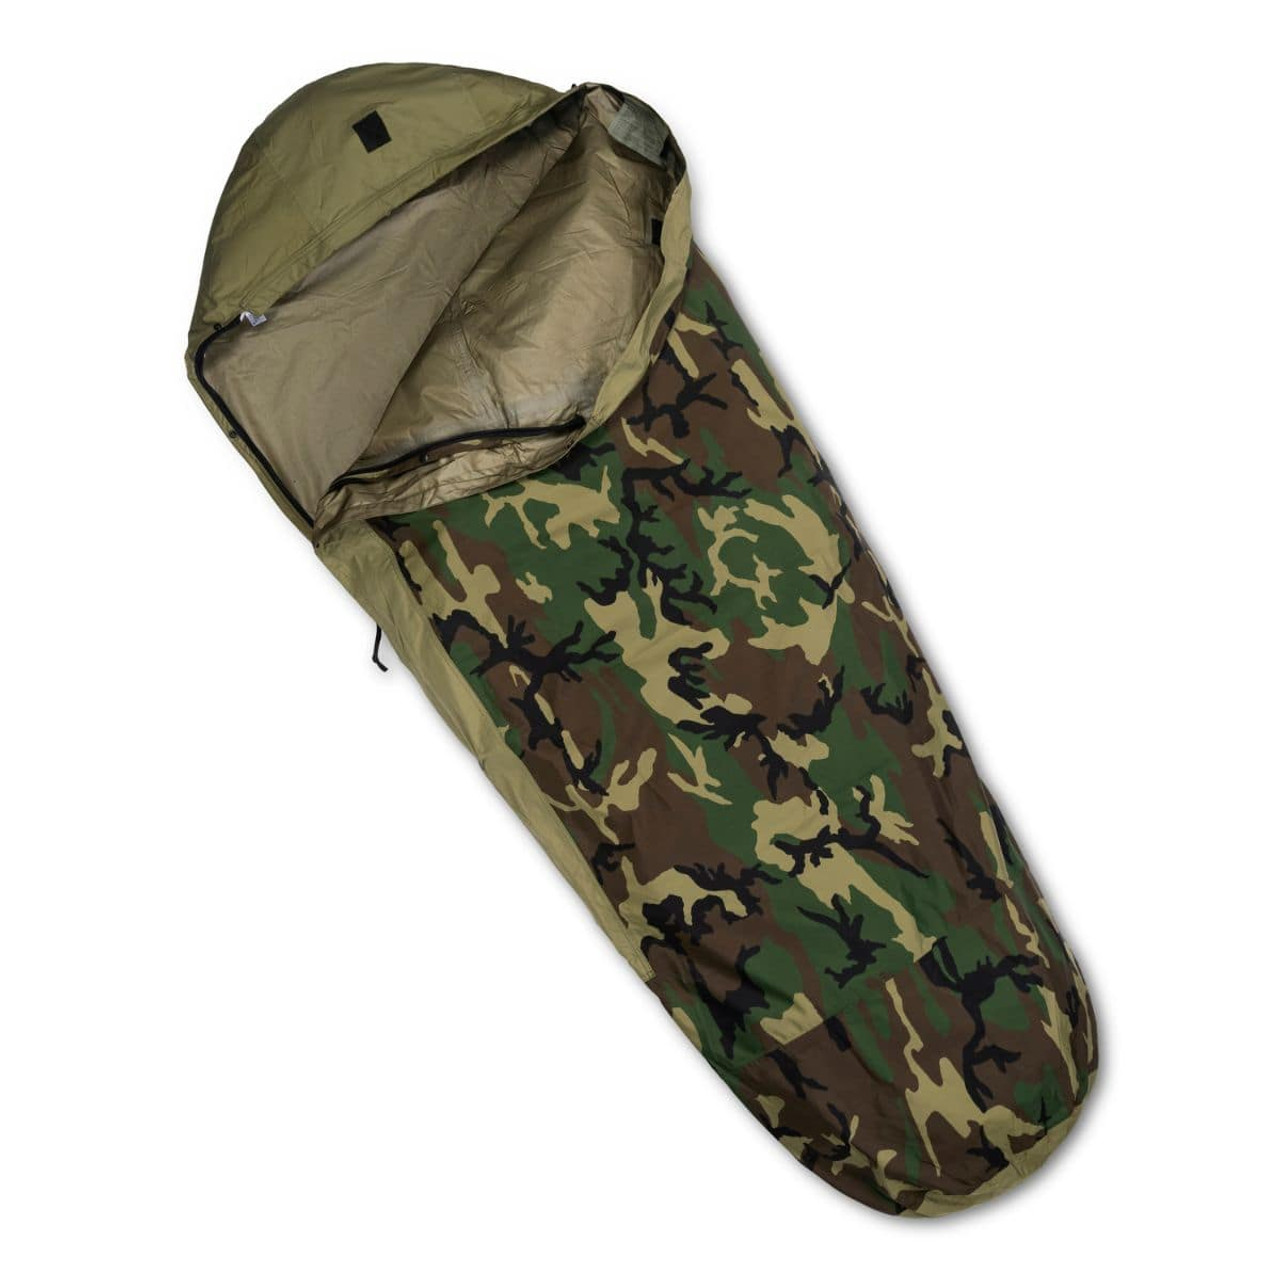 Share 87+ military sleeping bag with arms - in.duhocakina